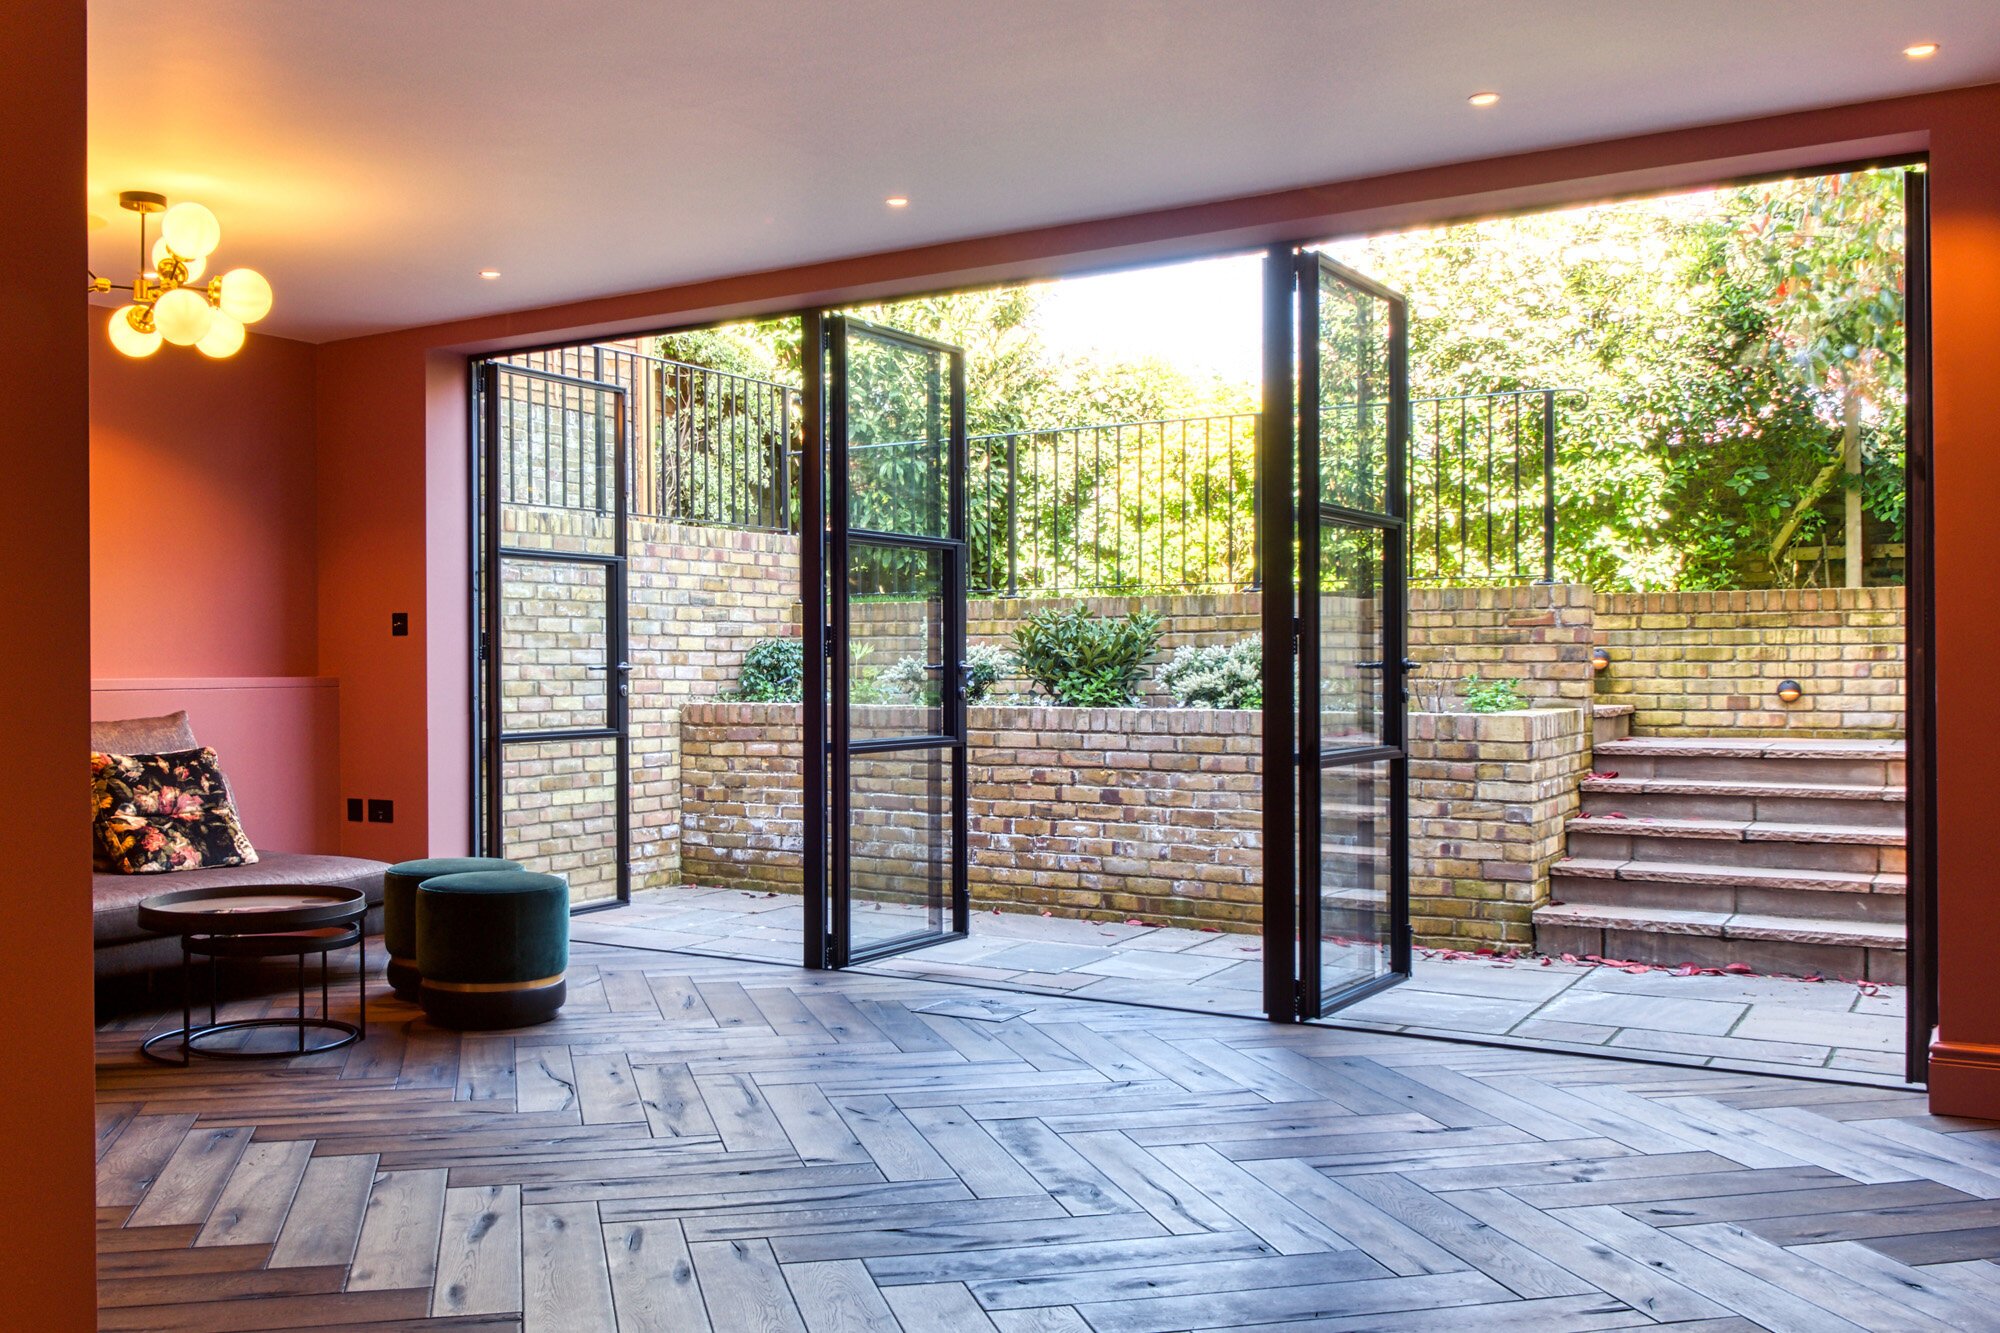   Ealing Townhouse  Thermally Broken Steel. Glass: ESG 4mm/12mm warmed/ESG 4mm toughened both sides 